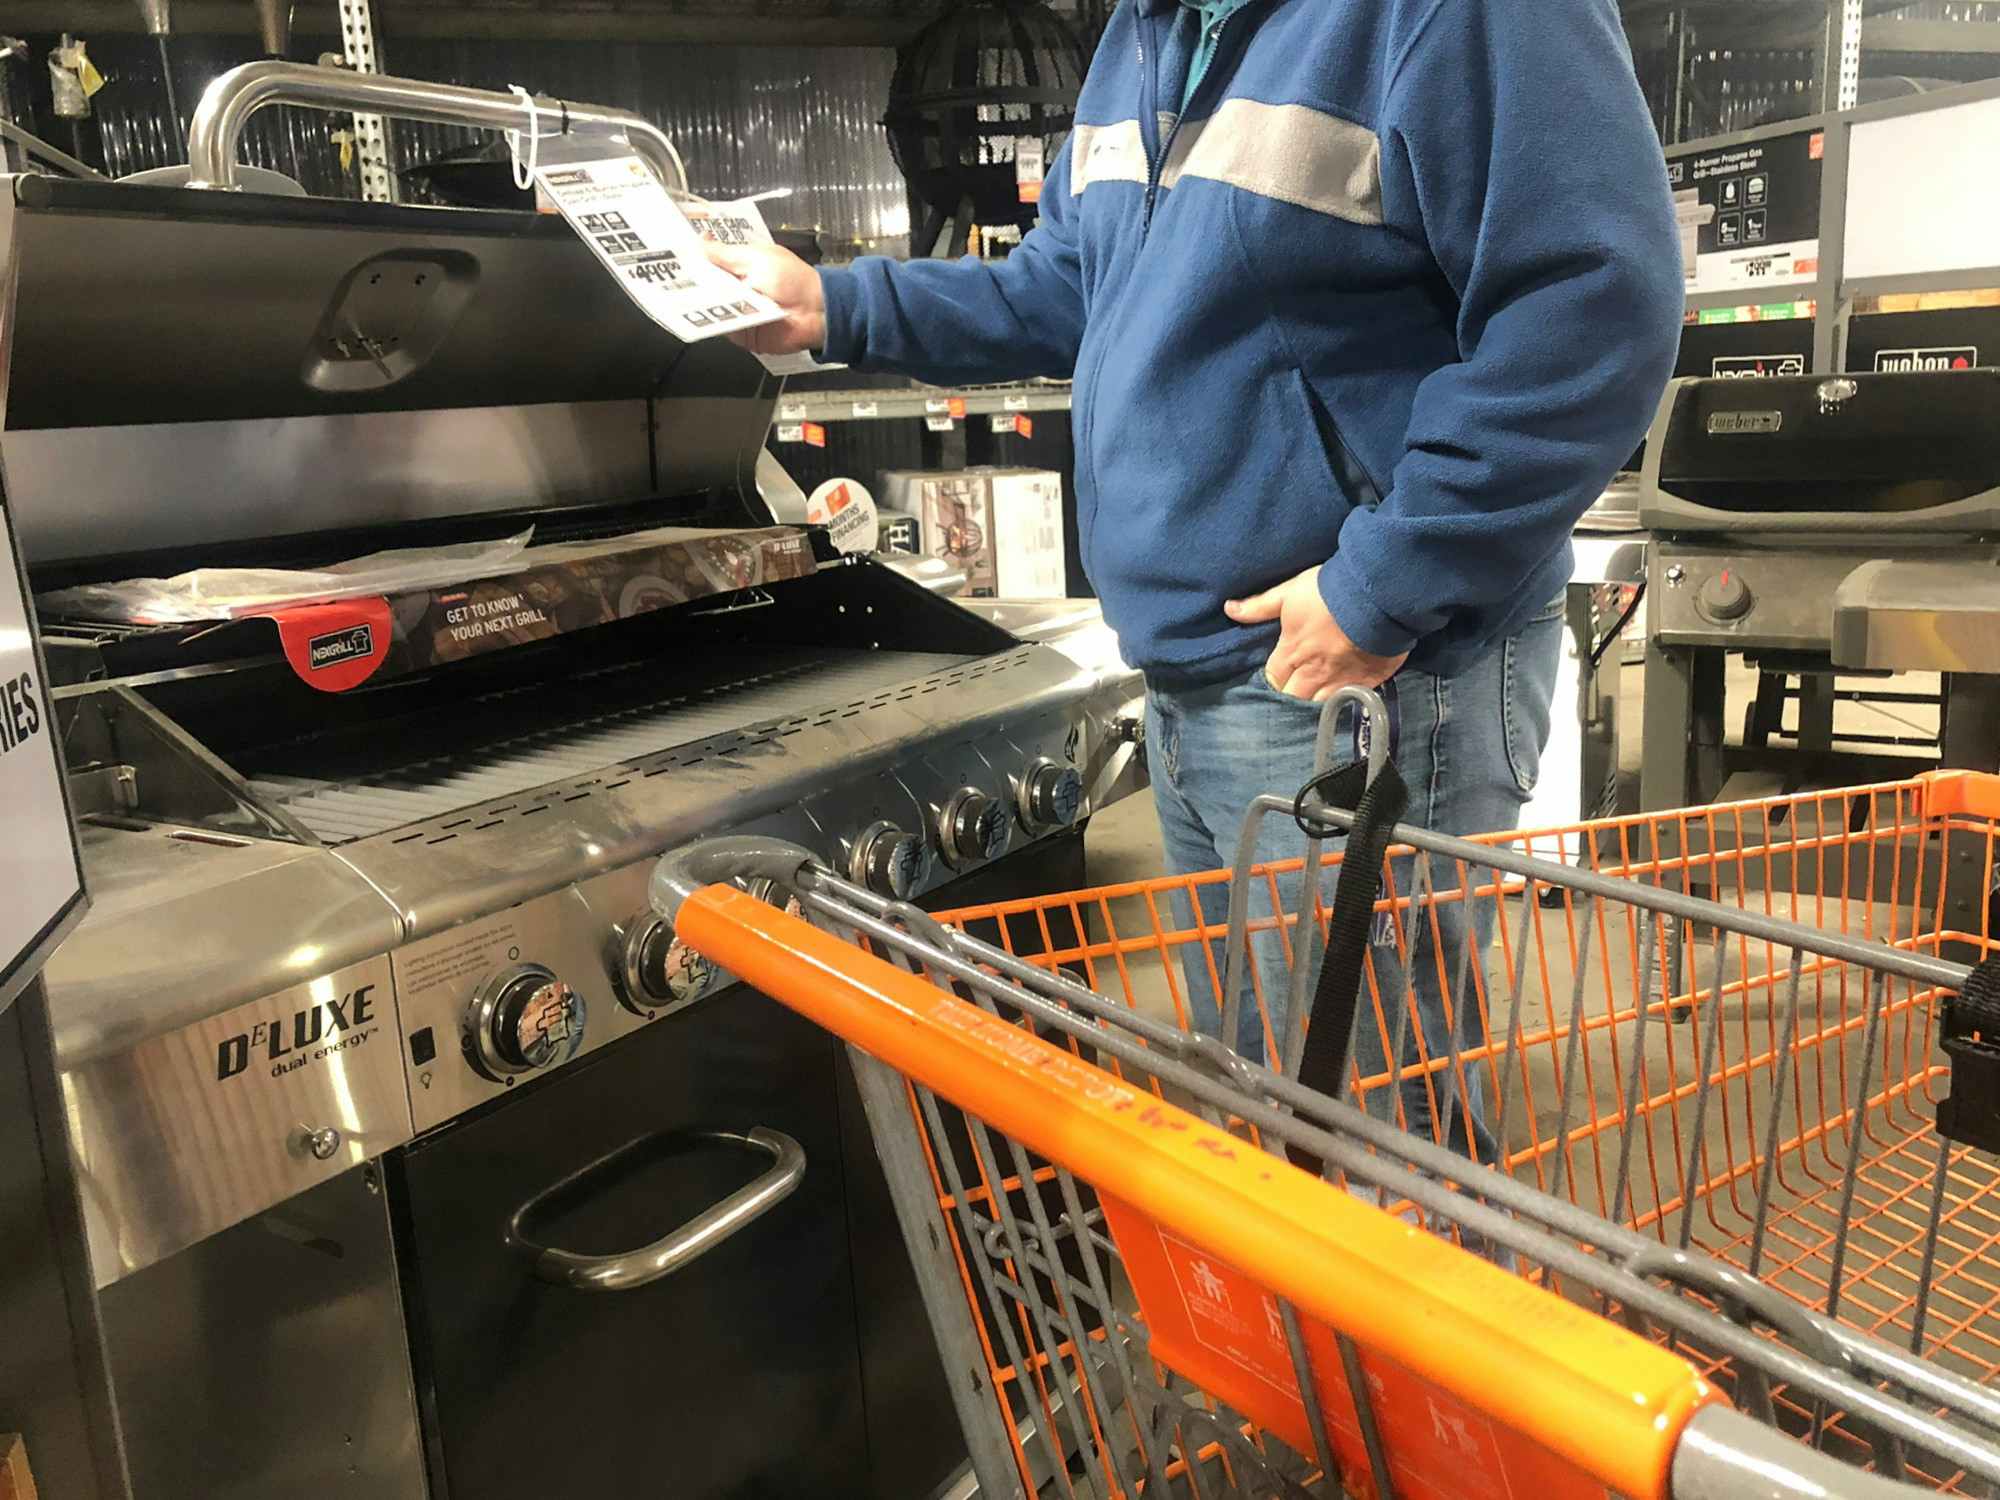 a man looks at the price tag of a grill at Home Depot